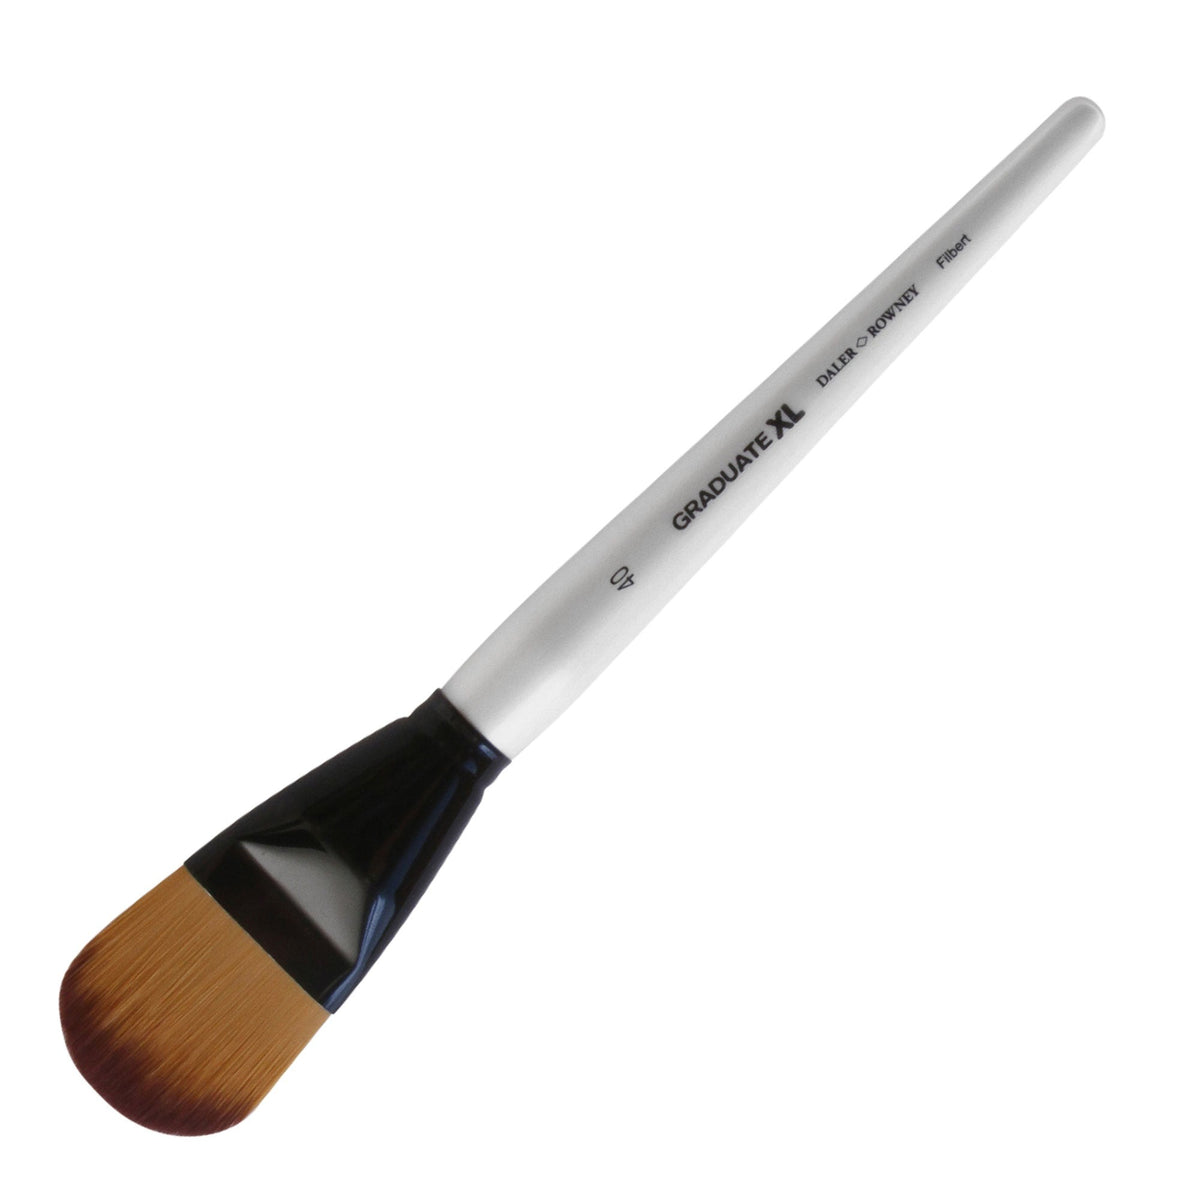 Daler-Rowney Graduate XL Soft Synthetic Filbert Brushes - 40